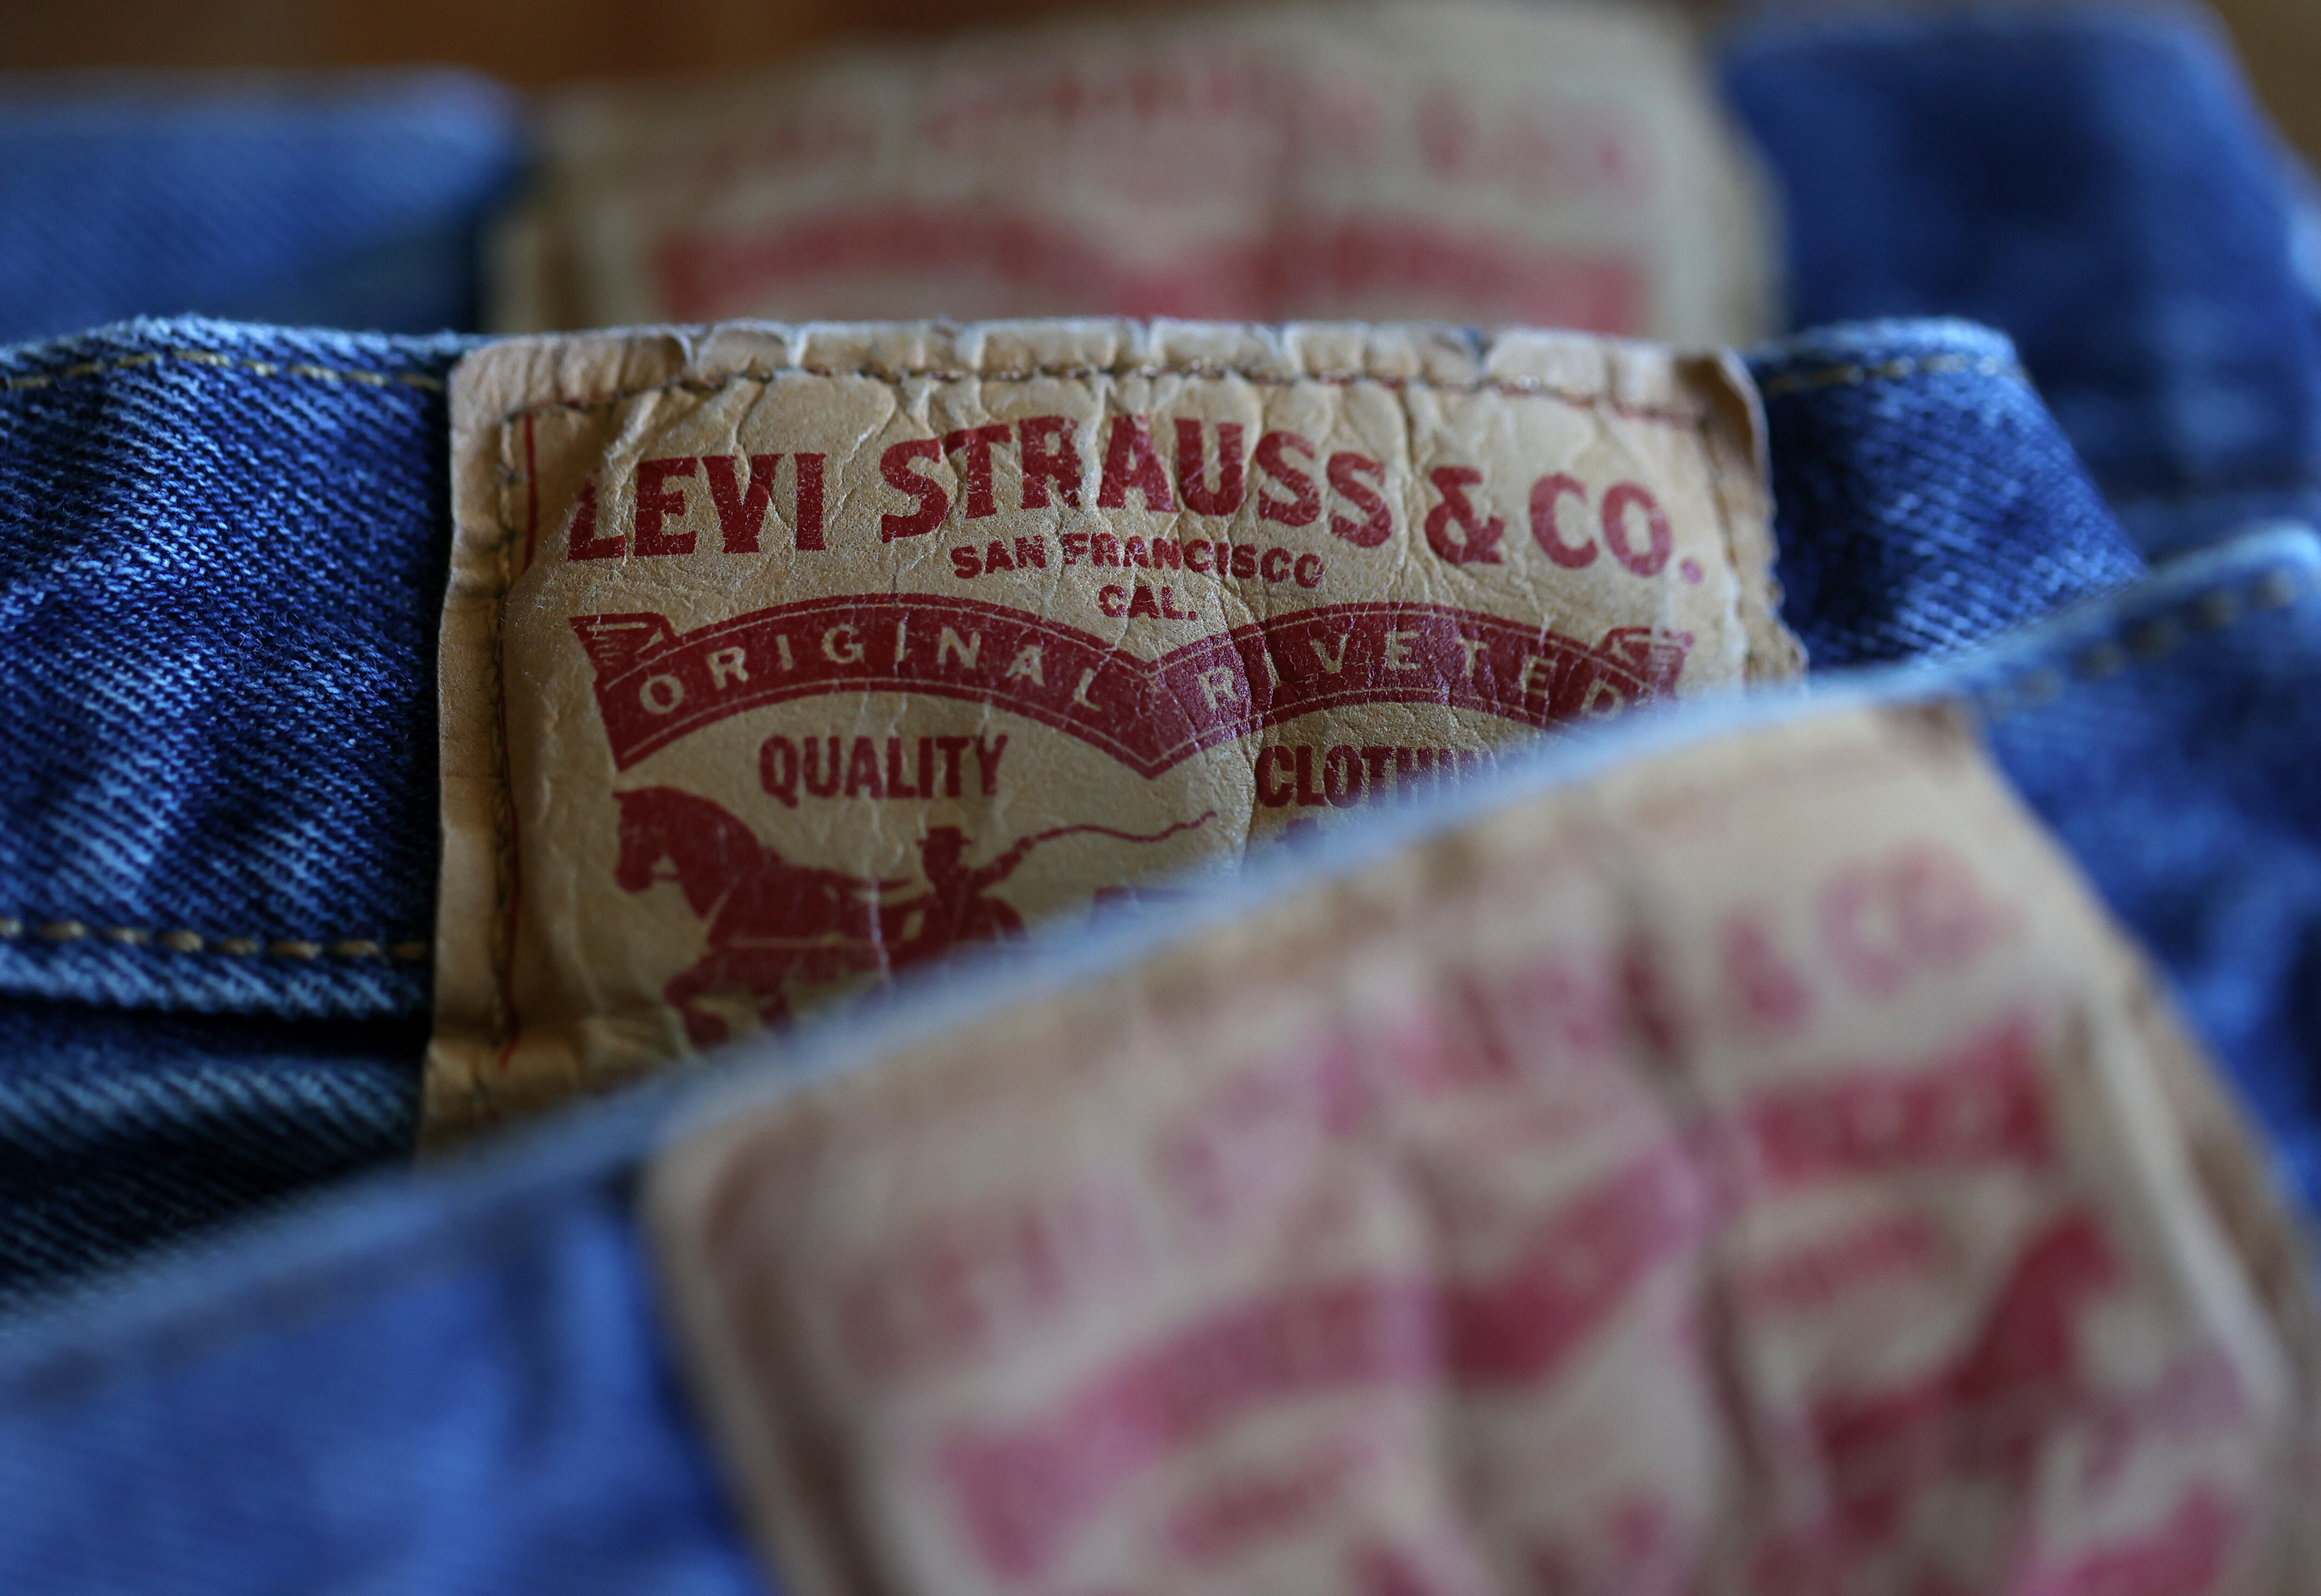 Levi's jeans from 1800s with racist slogan sell for over $120,000 -  National